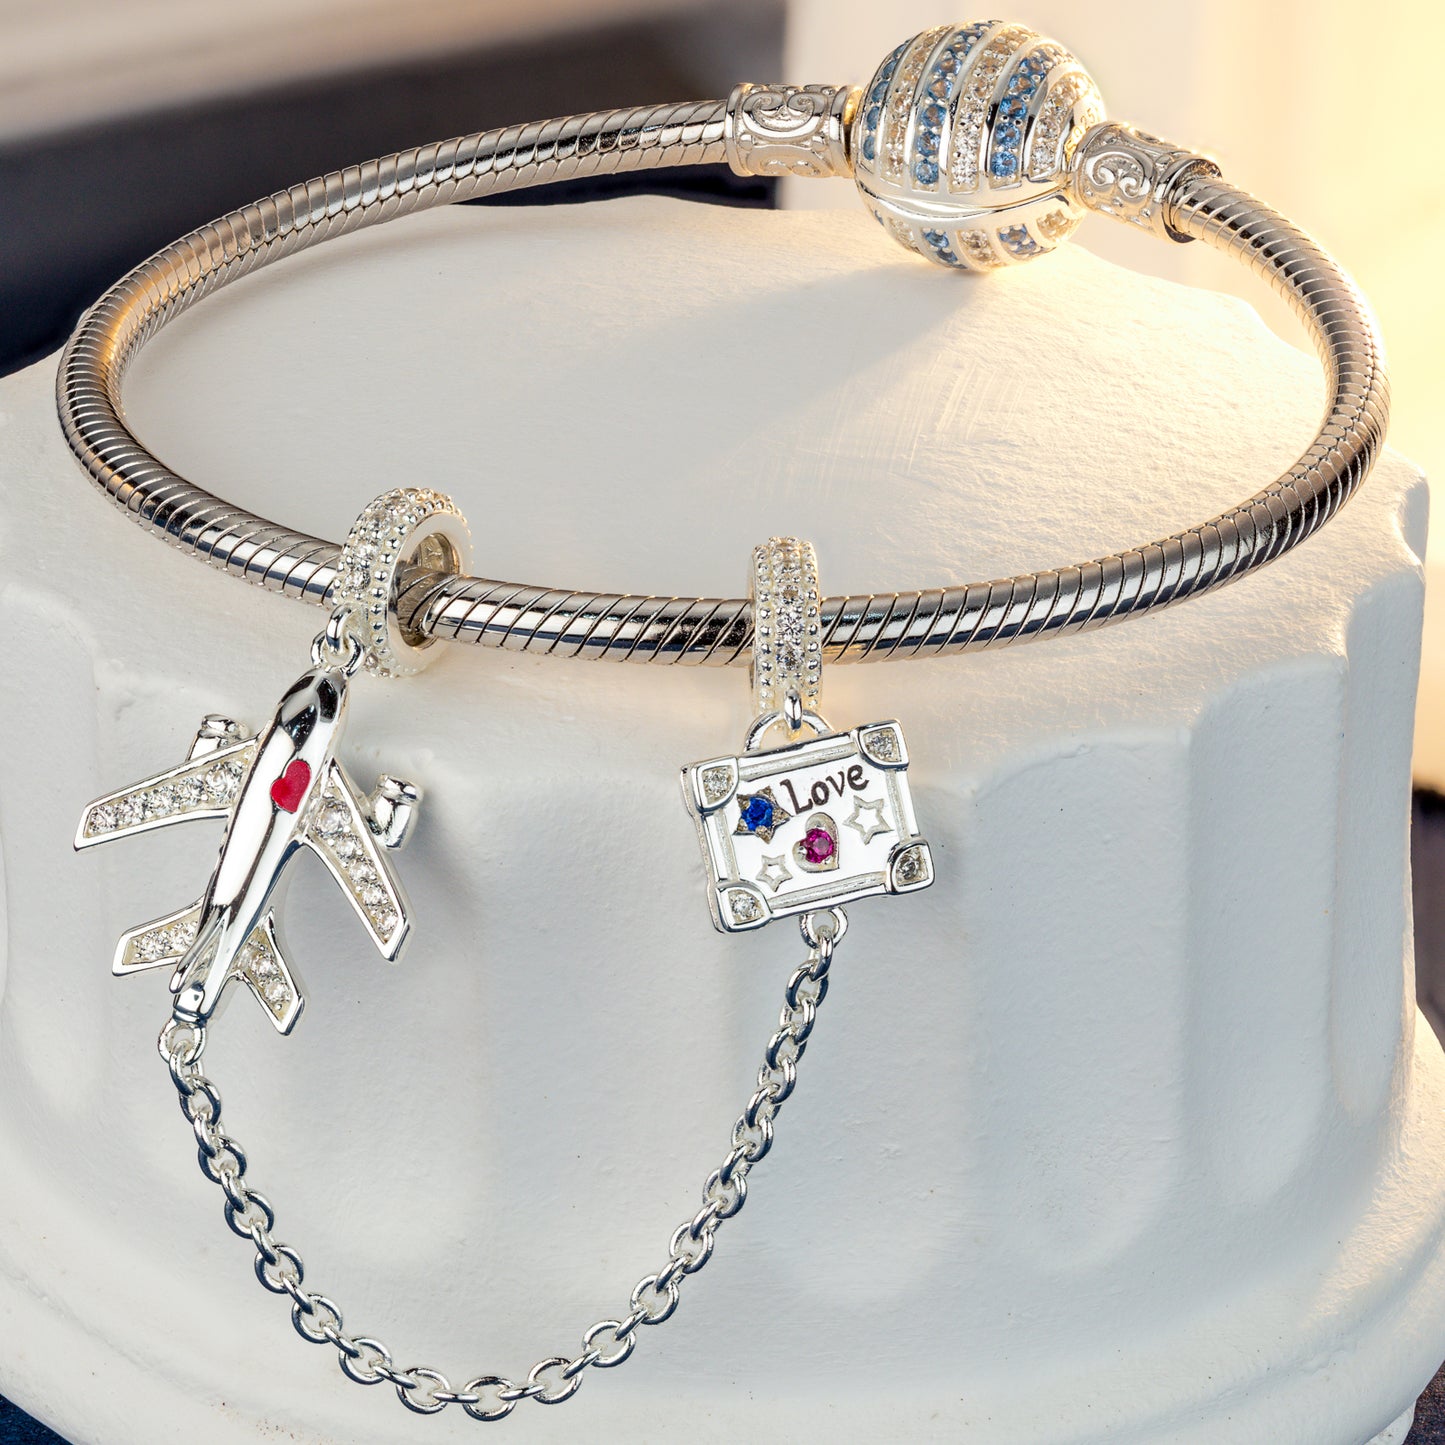 Journey to Love Tarnish-resistant Silver Charms With Enamel In White Gold Plated